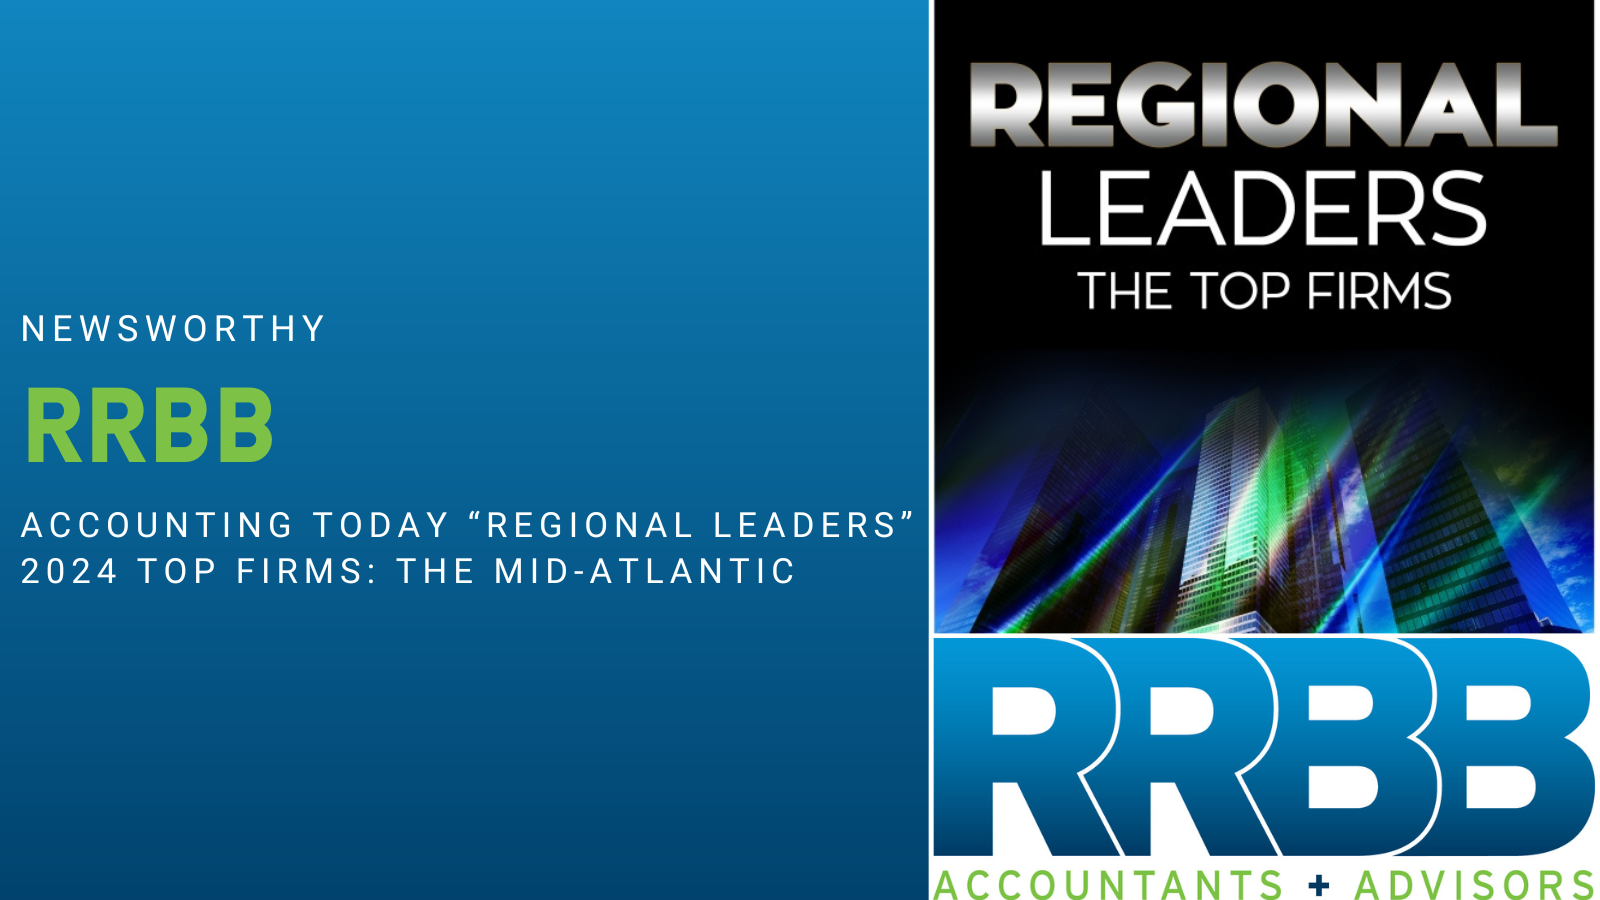 RRBB named in Accounting Today “Regional Leaders” list of 2024 Top Firms: The Mid-Atlantic